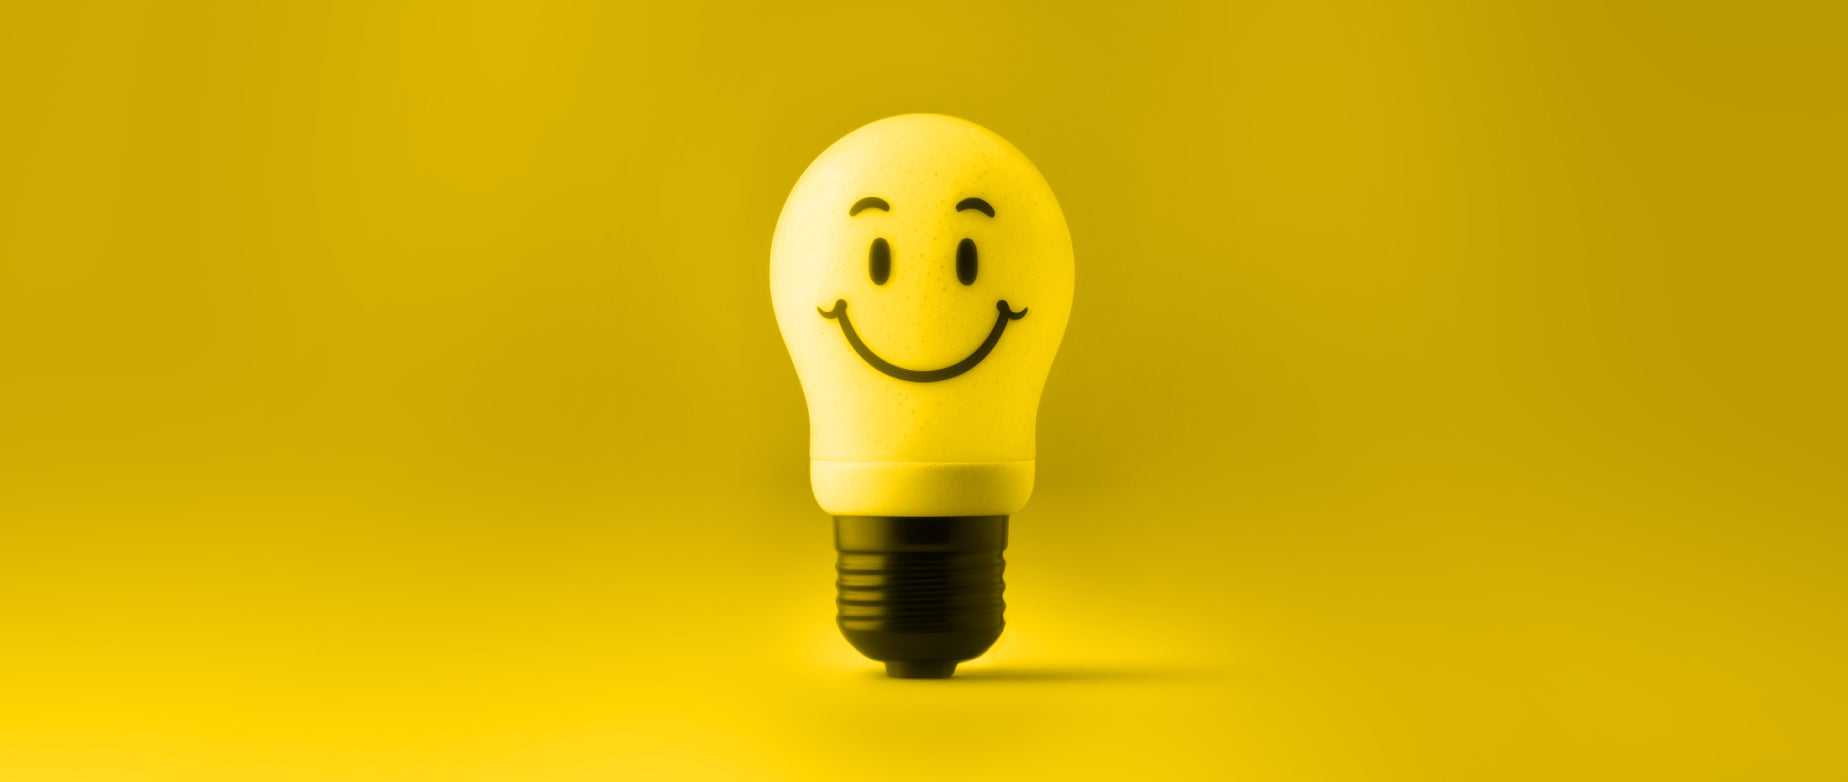 a yellow lightbulb with a smiley face on it: entrepreneurial traits